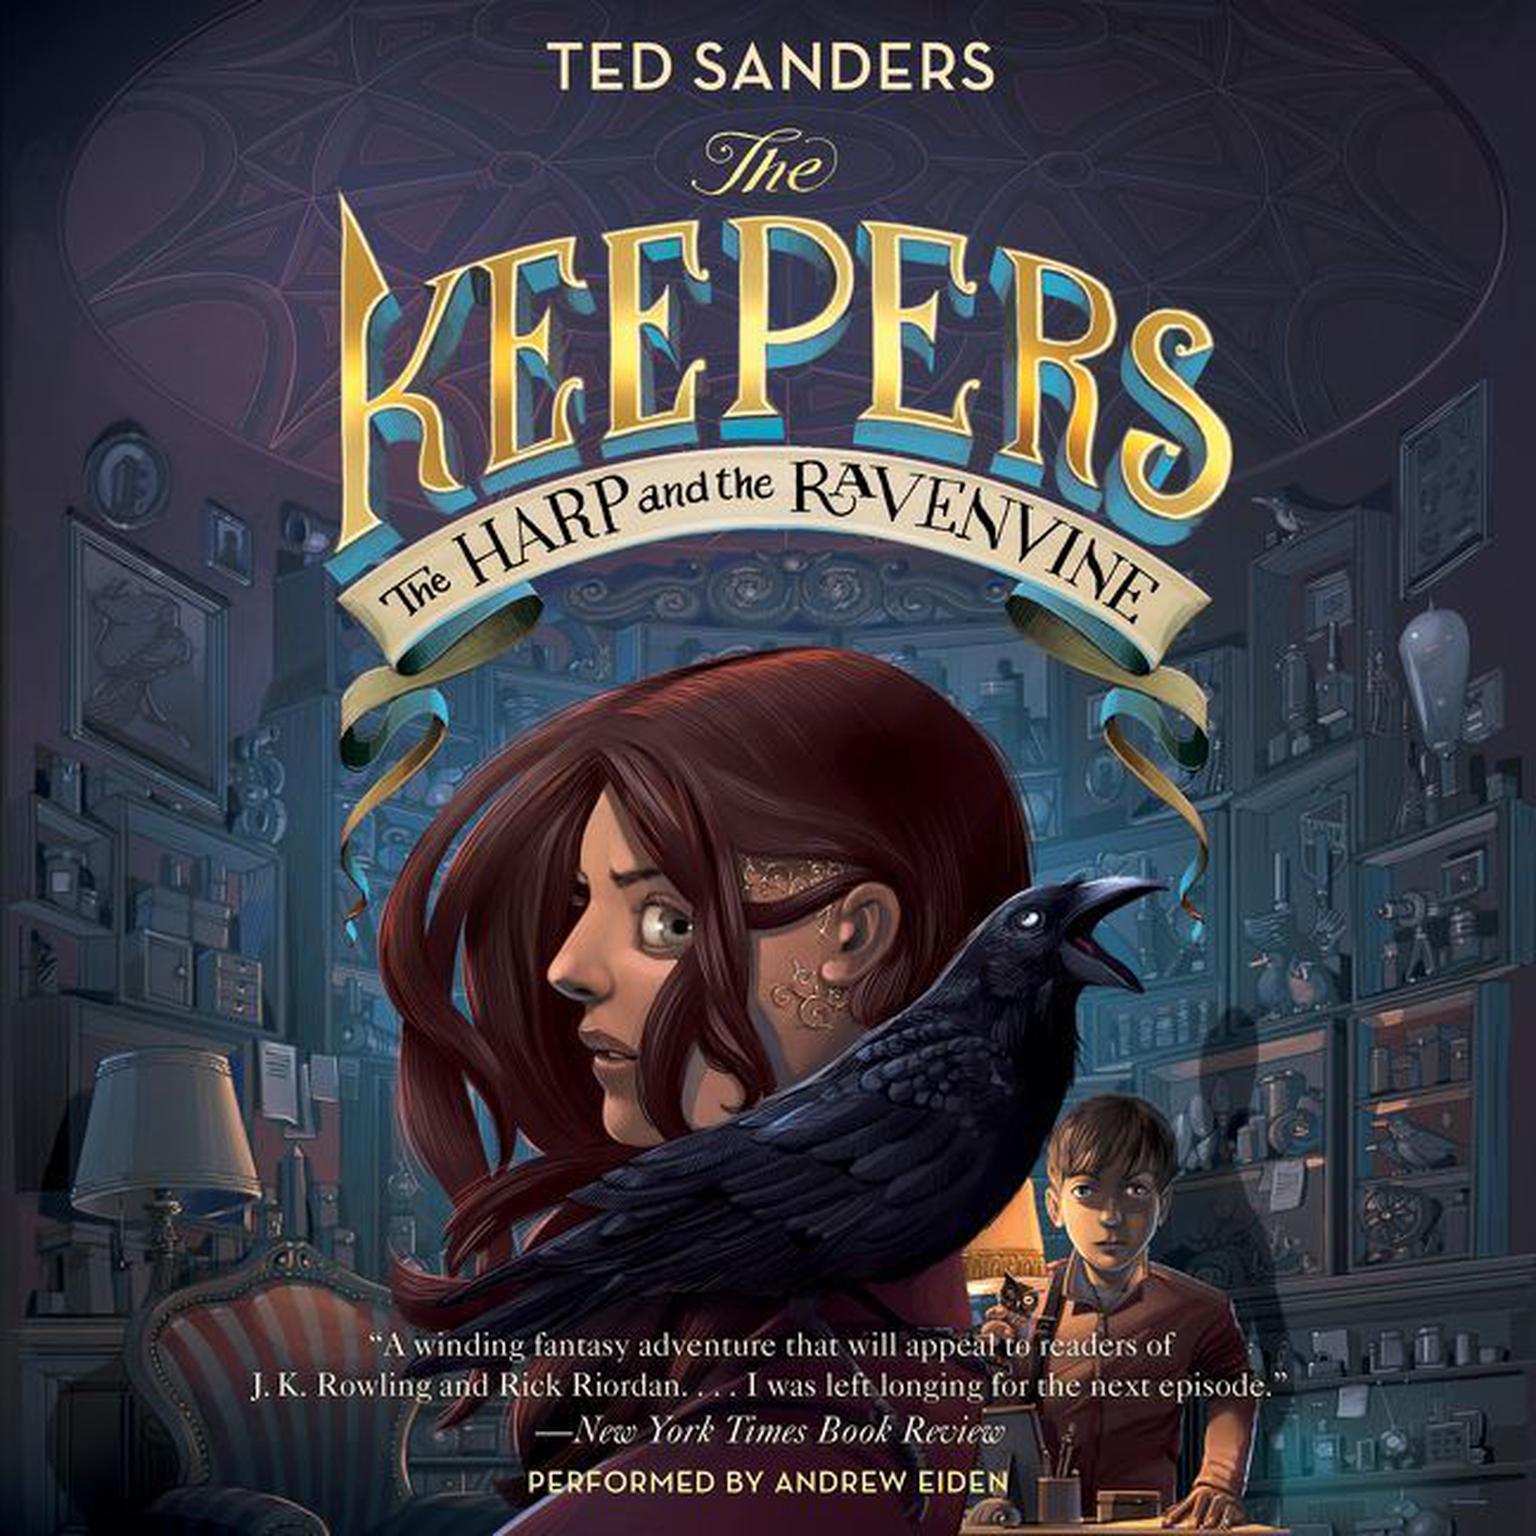 The Keepers #2: The Harp and the Ravenvine Audiobook, by Ted Sanders